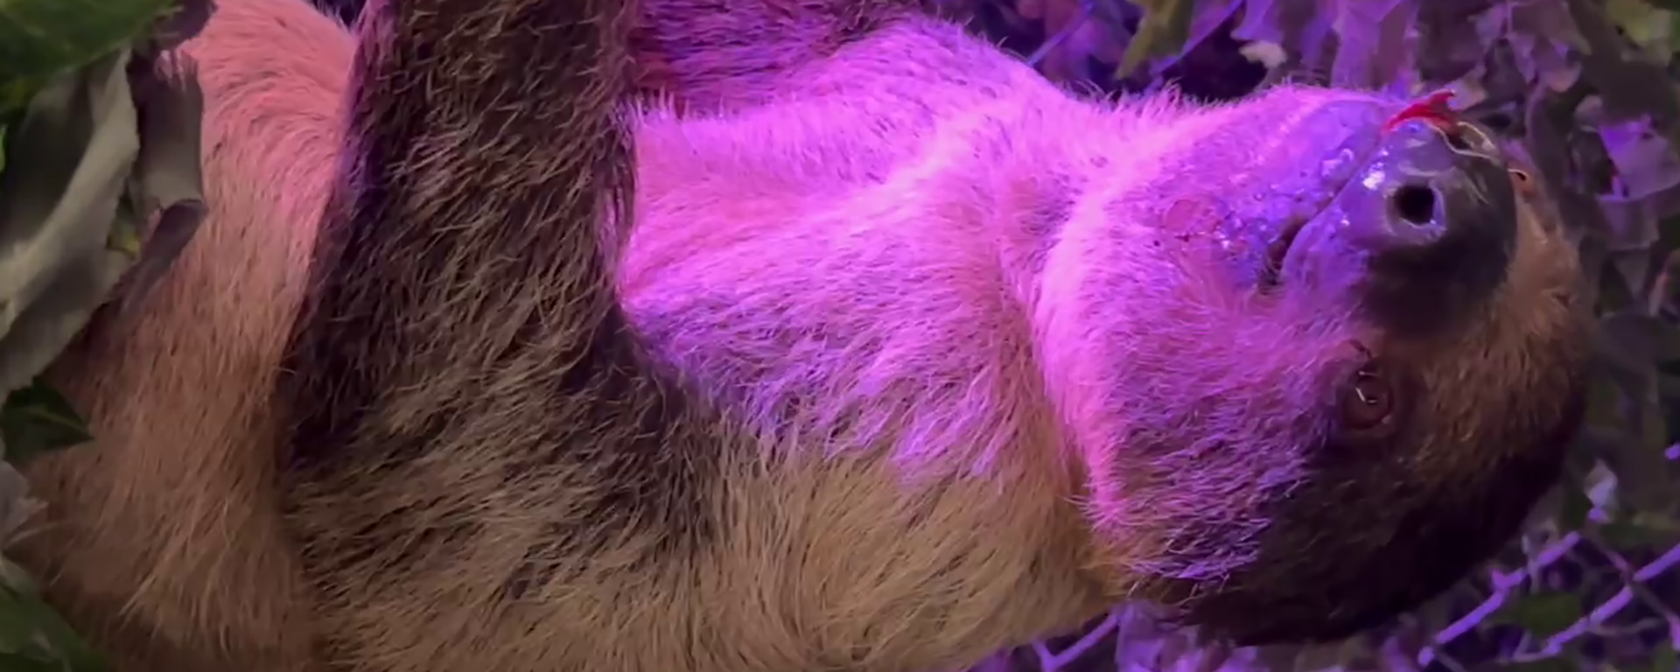 Undercover video of Sloth Encounters shows need for Better CARE for Animals Act